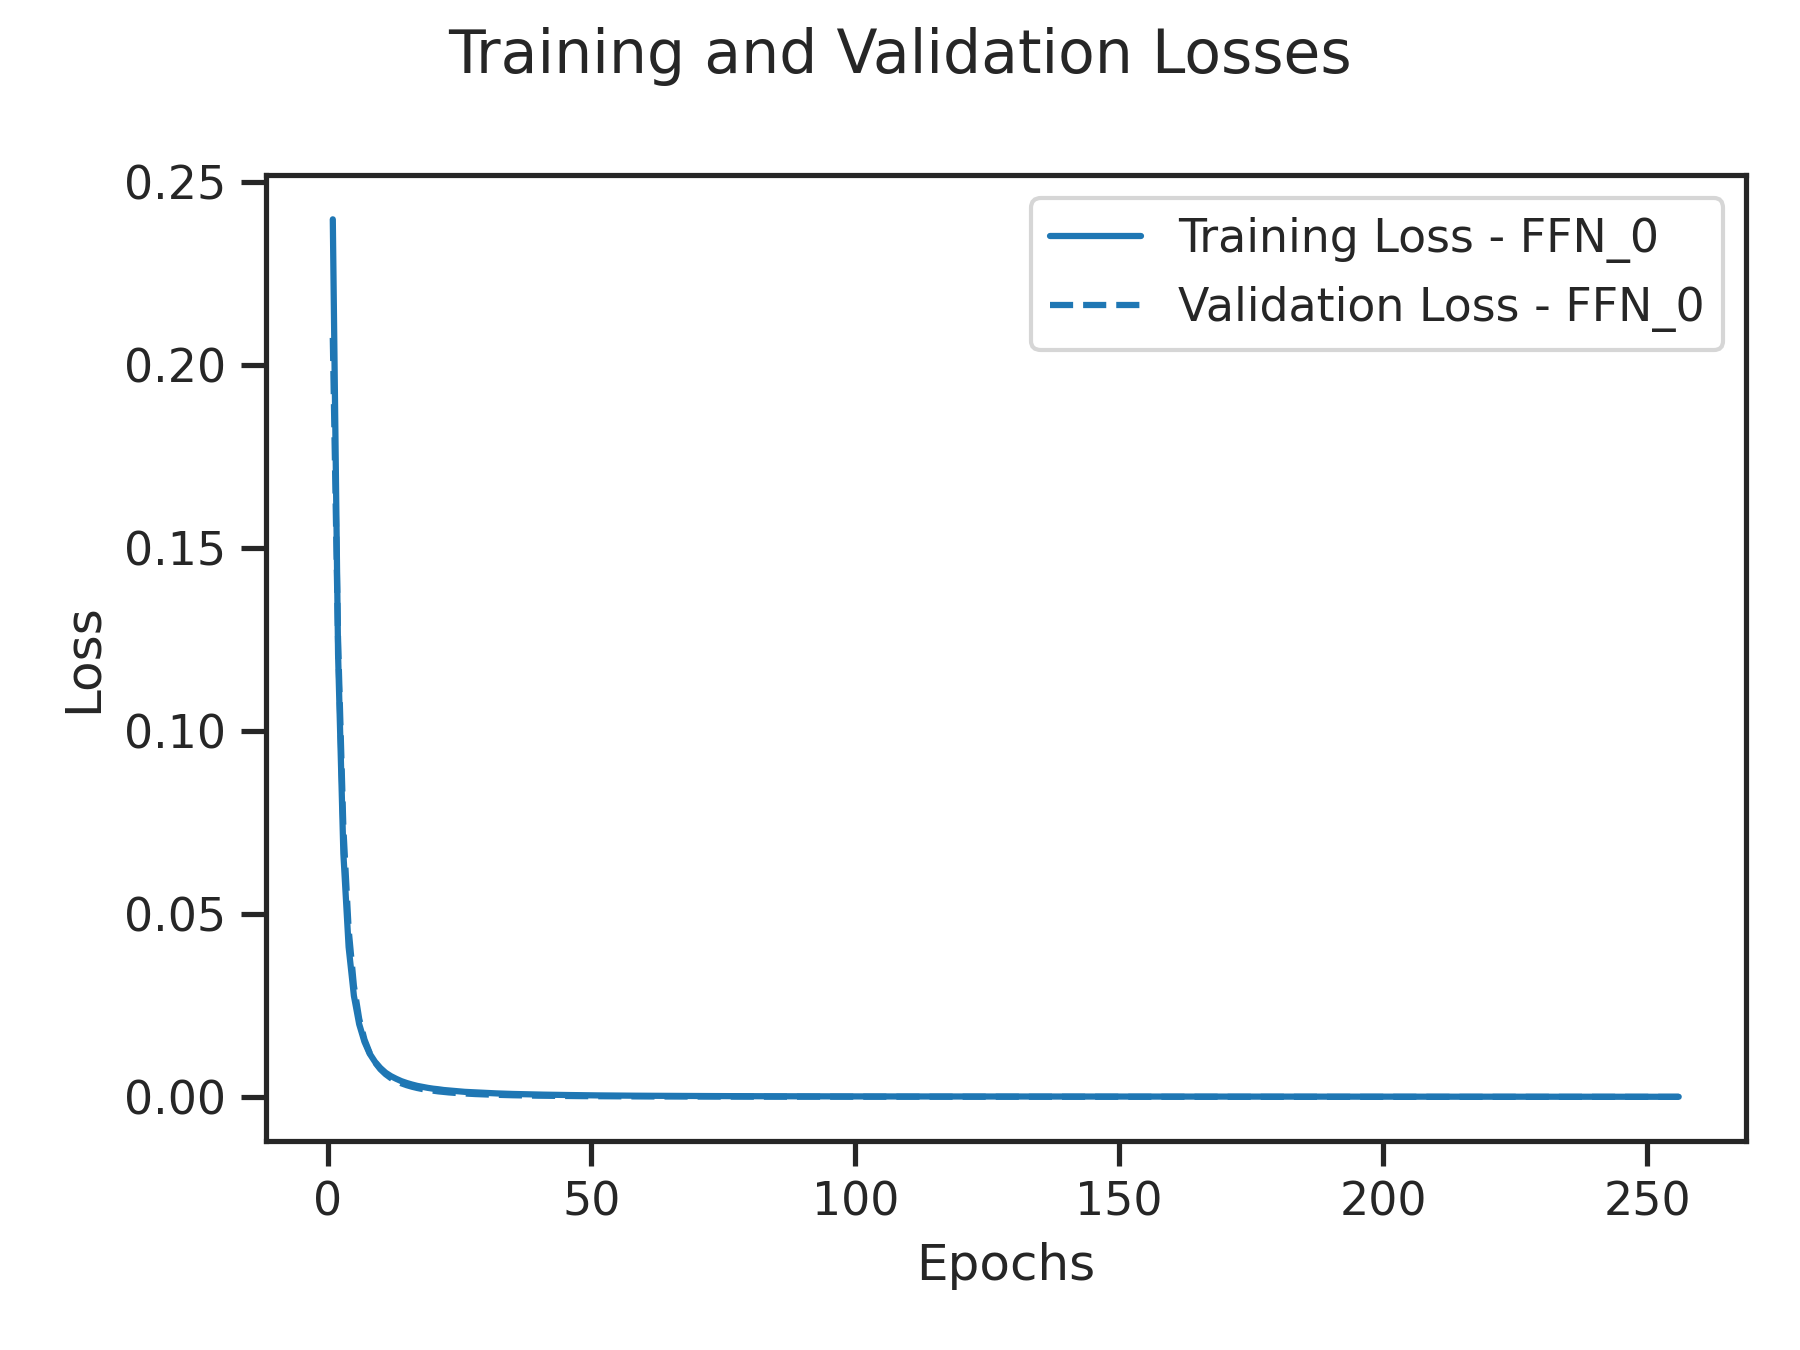 Training and Validation Losses for Credit Card Frauds